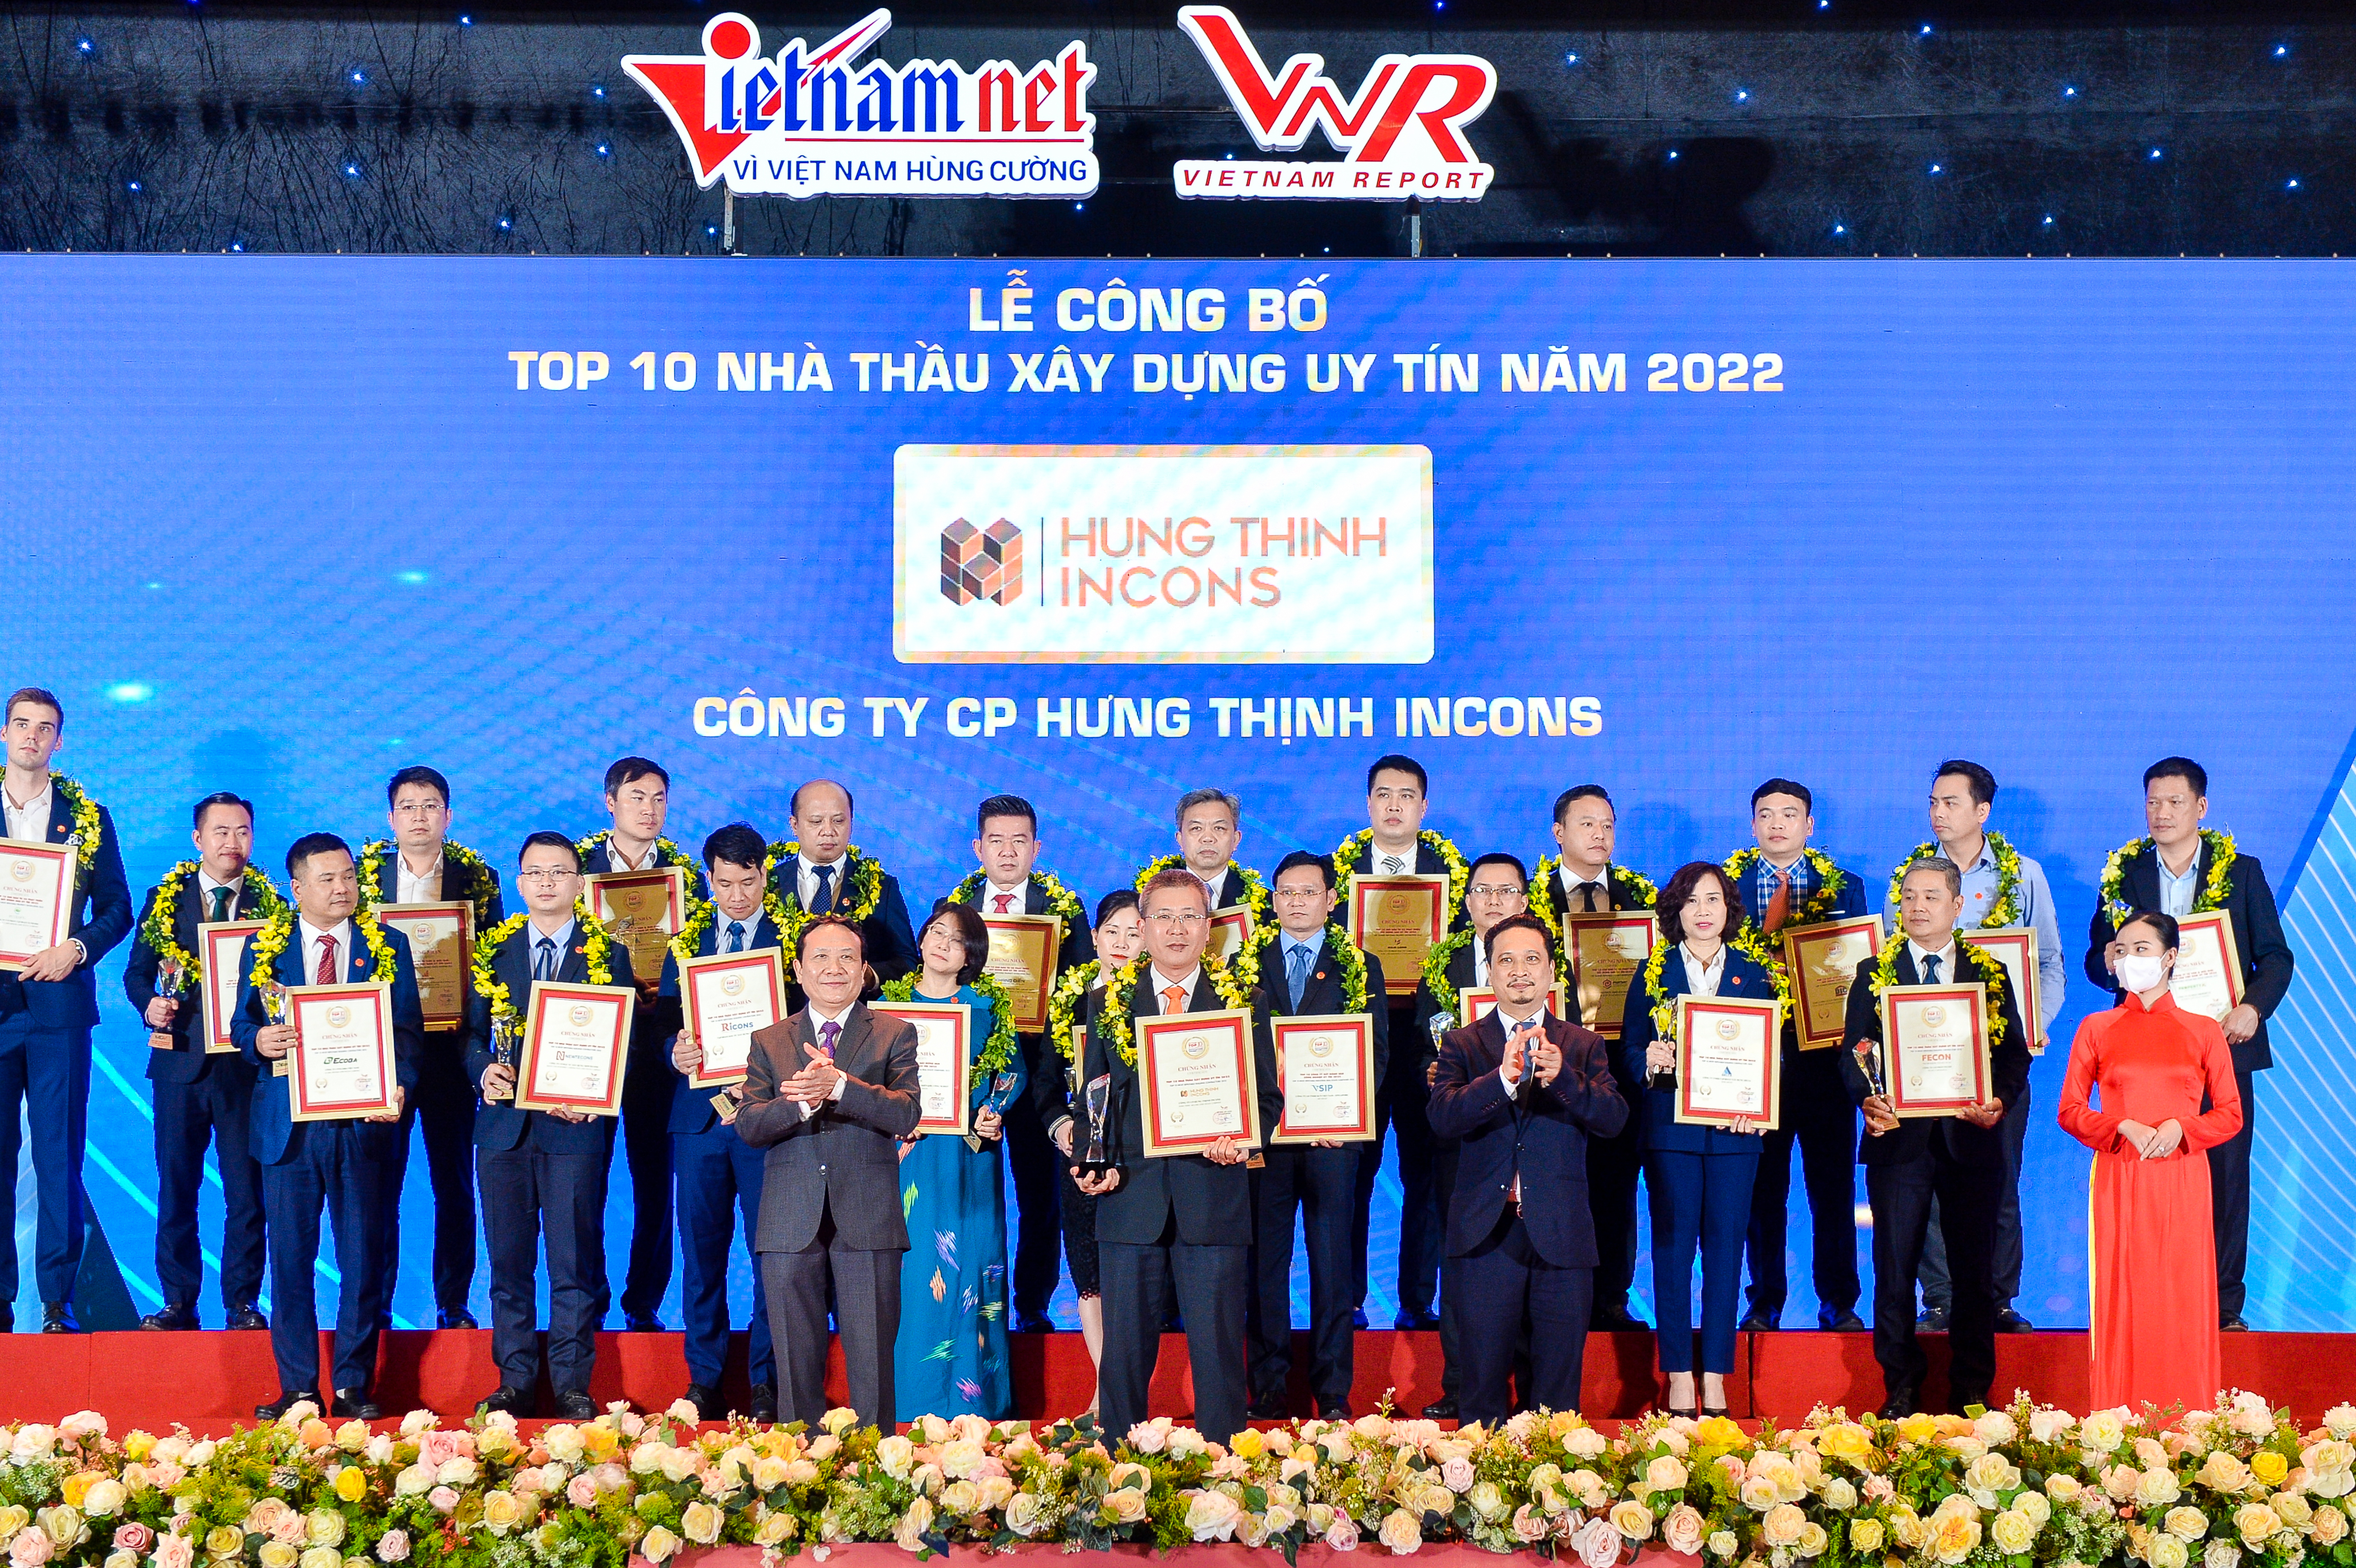 Hung Thinh Incons is proud of achieving 'Top 10 prestigious construction contractors 2022'